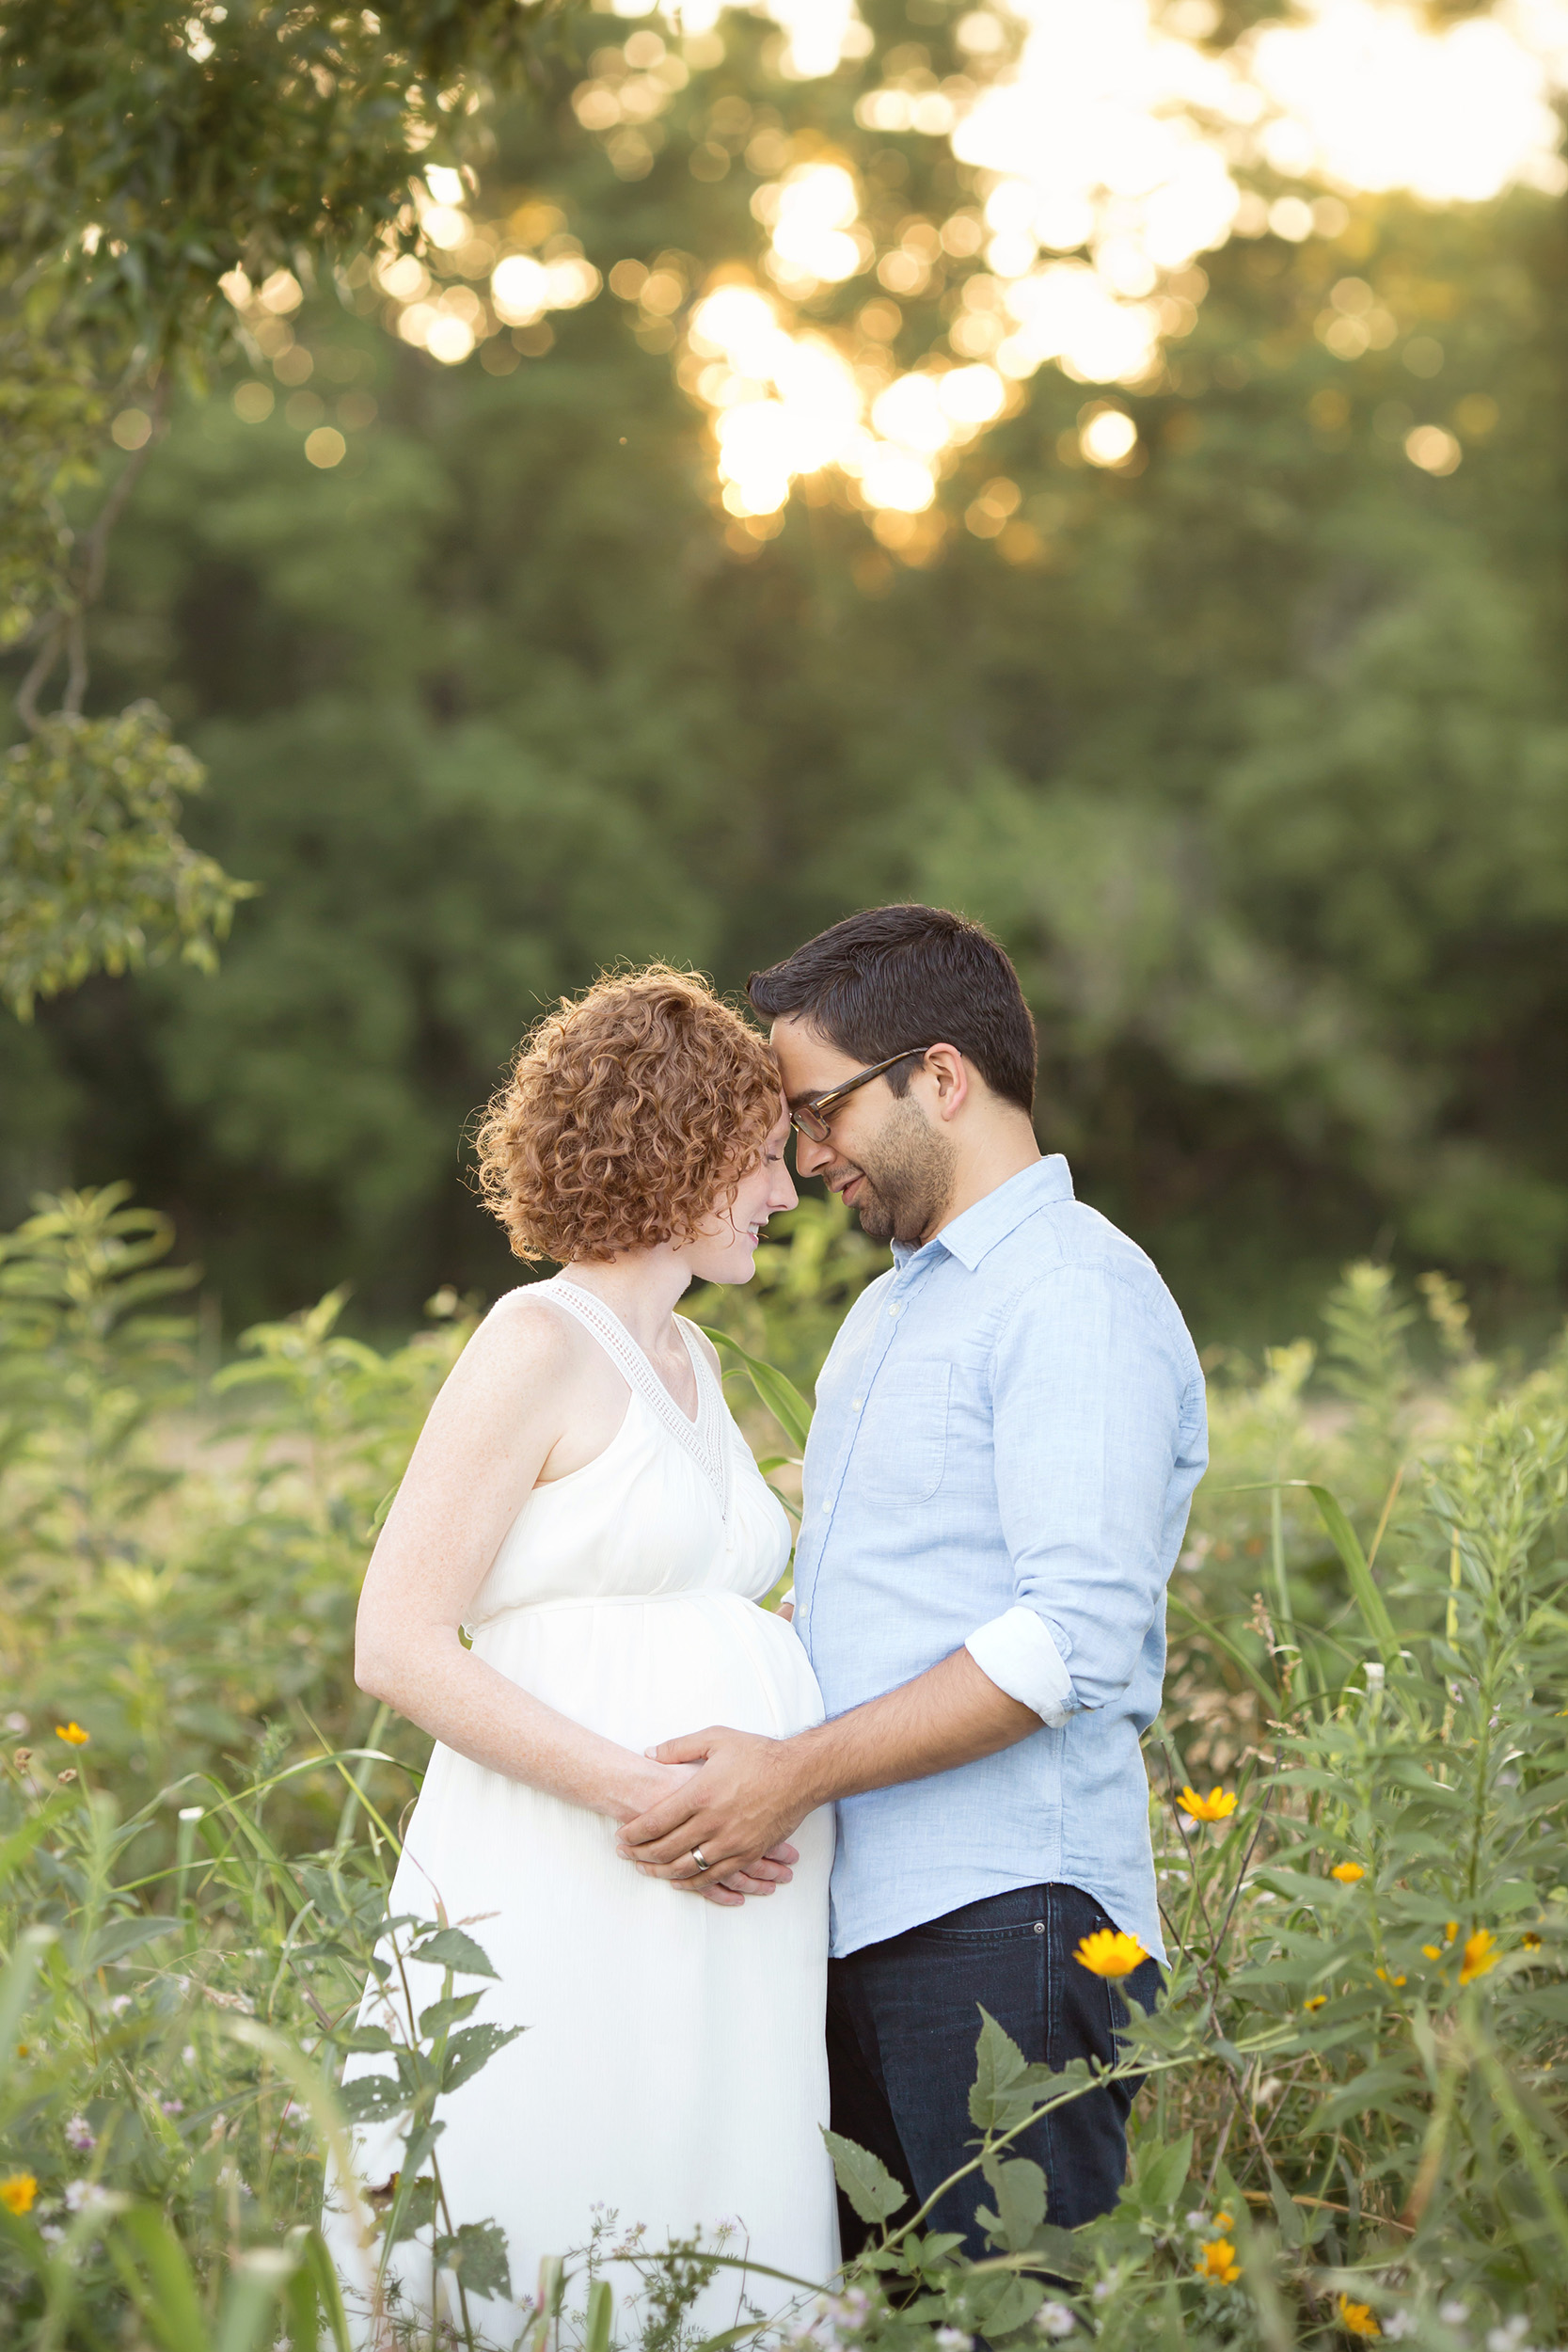 louisville ky maternity | julie brock photography | louisville ky newborn photographer | field maternity session husband and wife